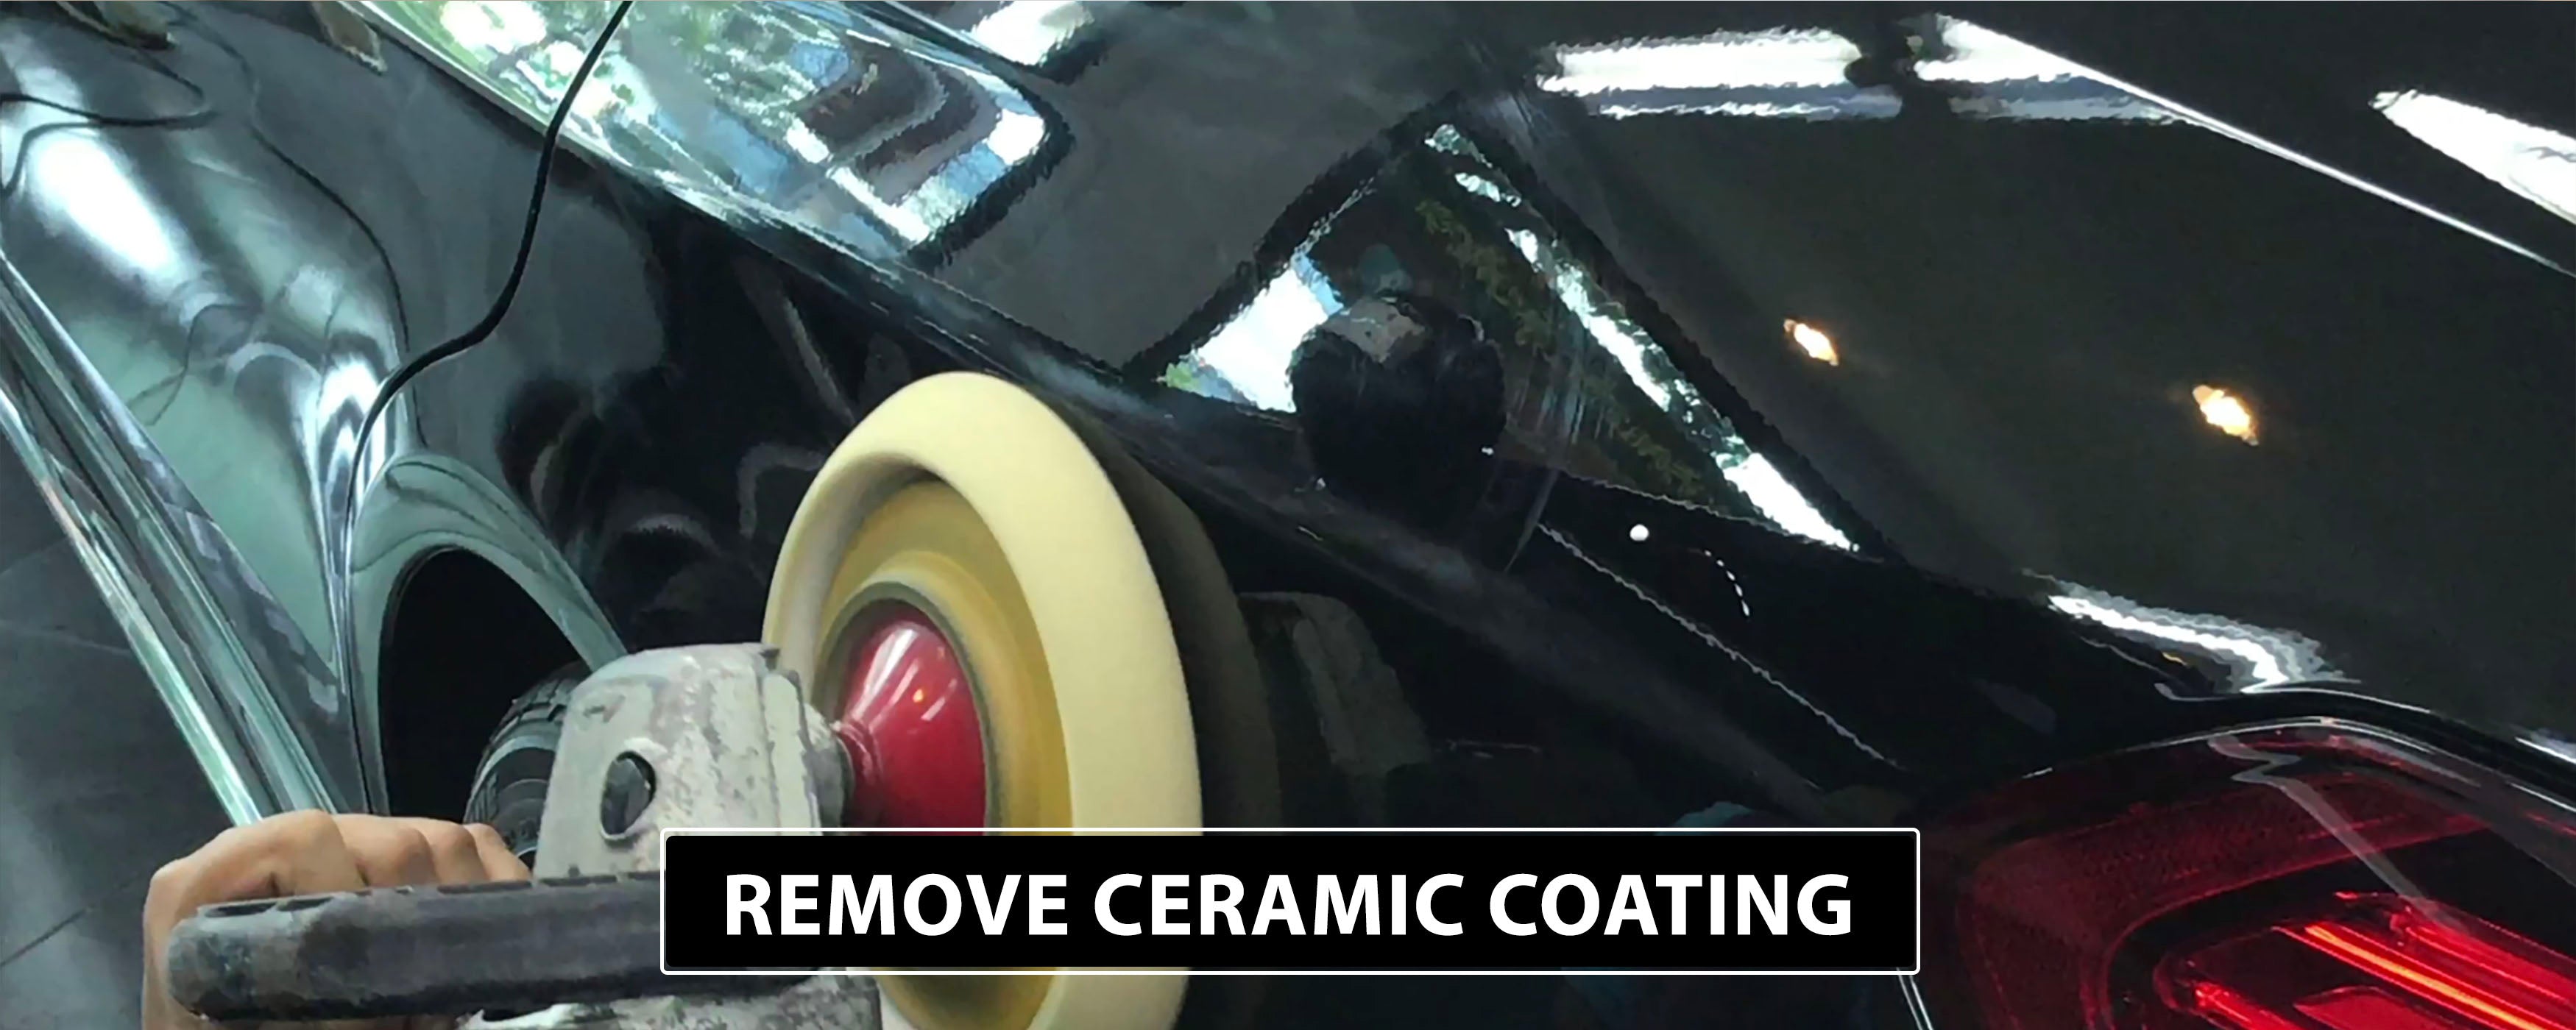 How To Remove Ceramic Coating From Your Vehicle